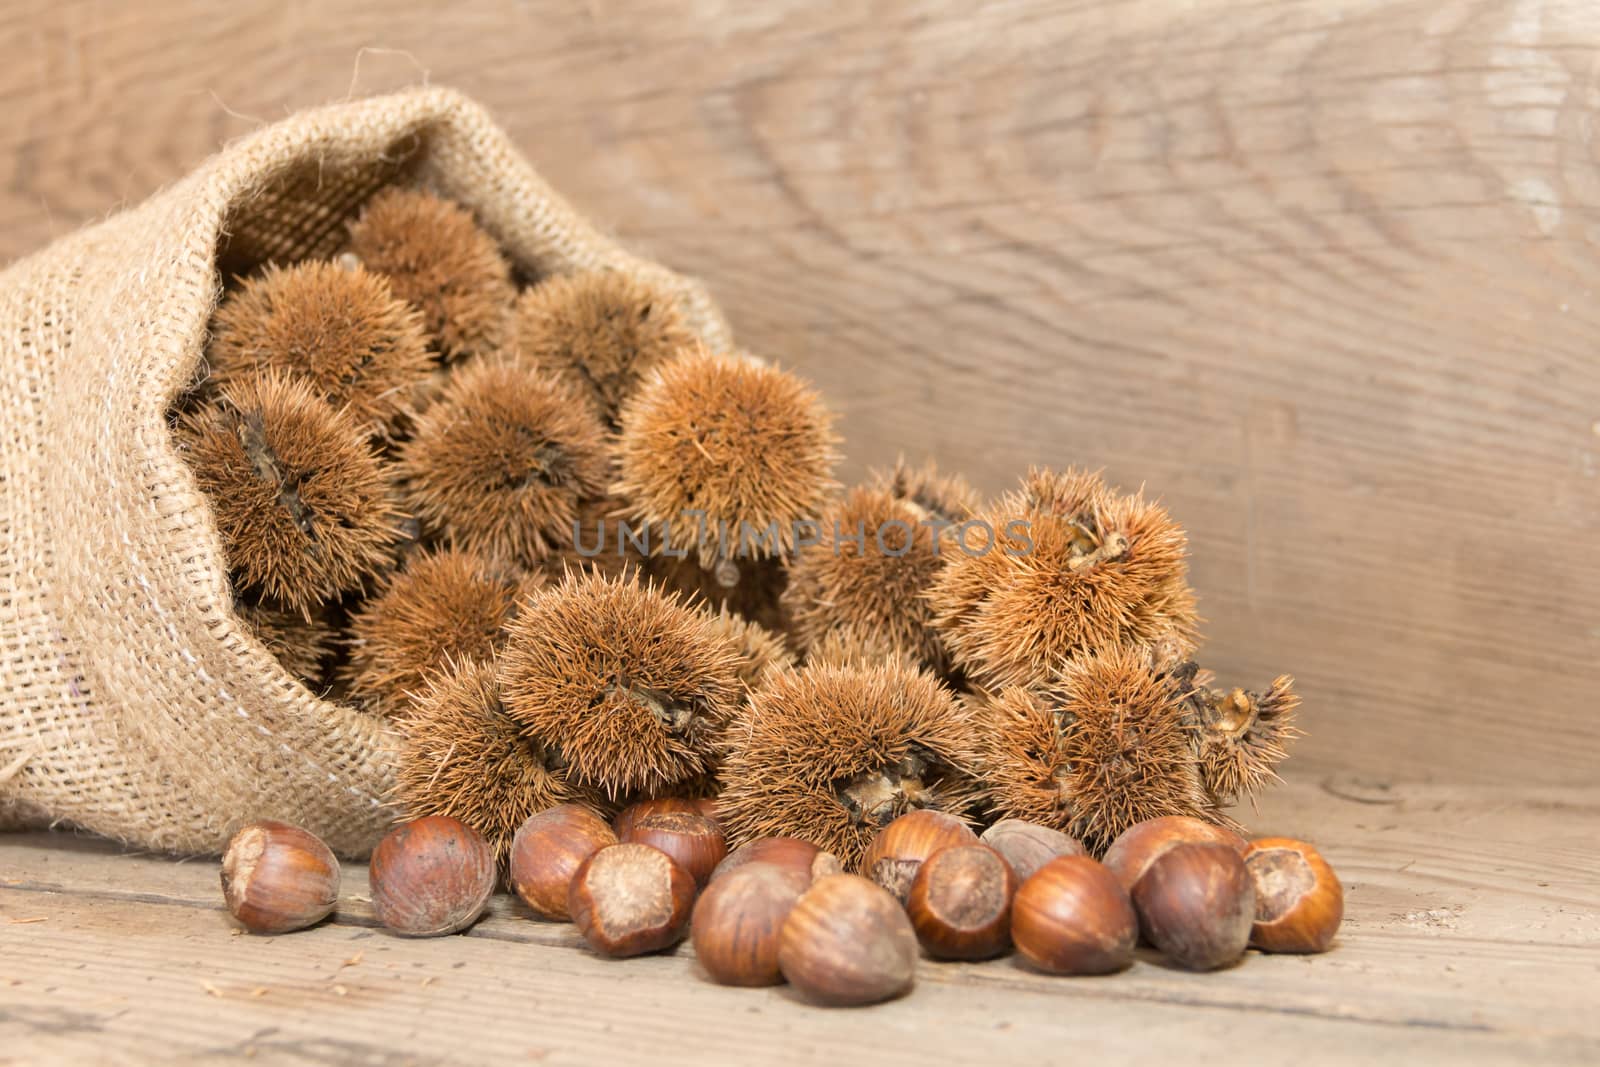 bag that spills chestnuts on rustic wood